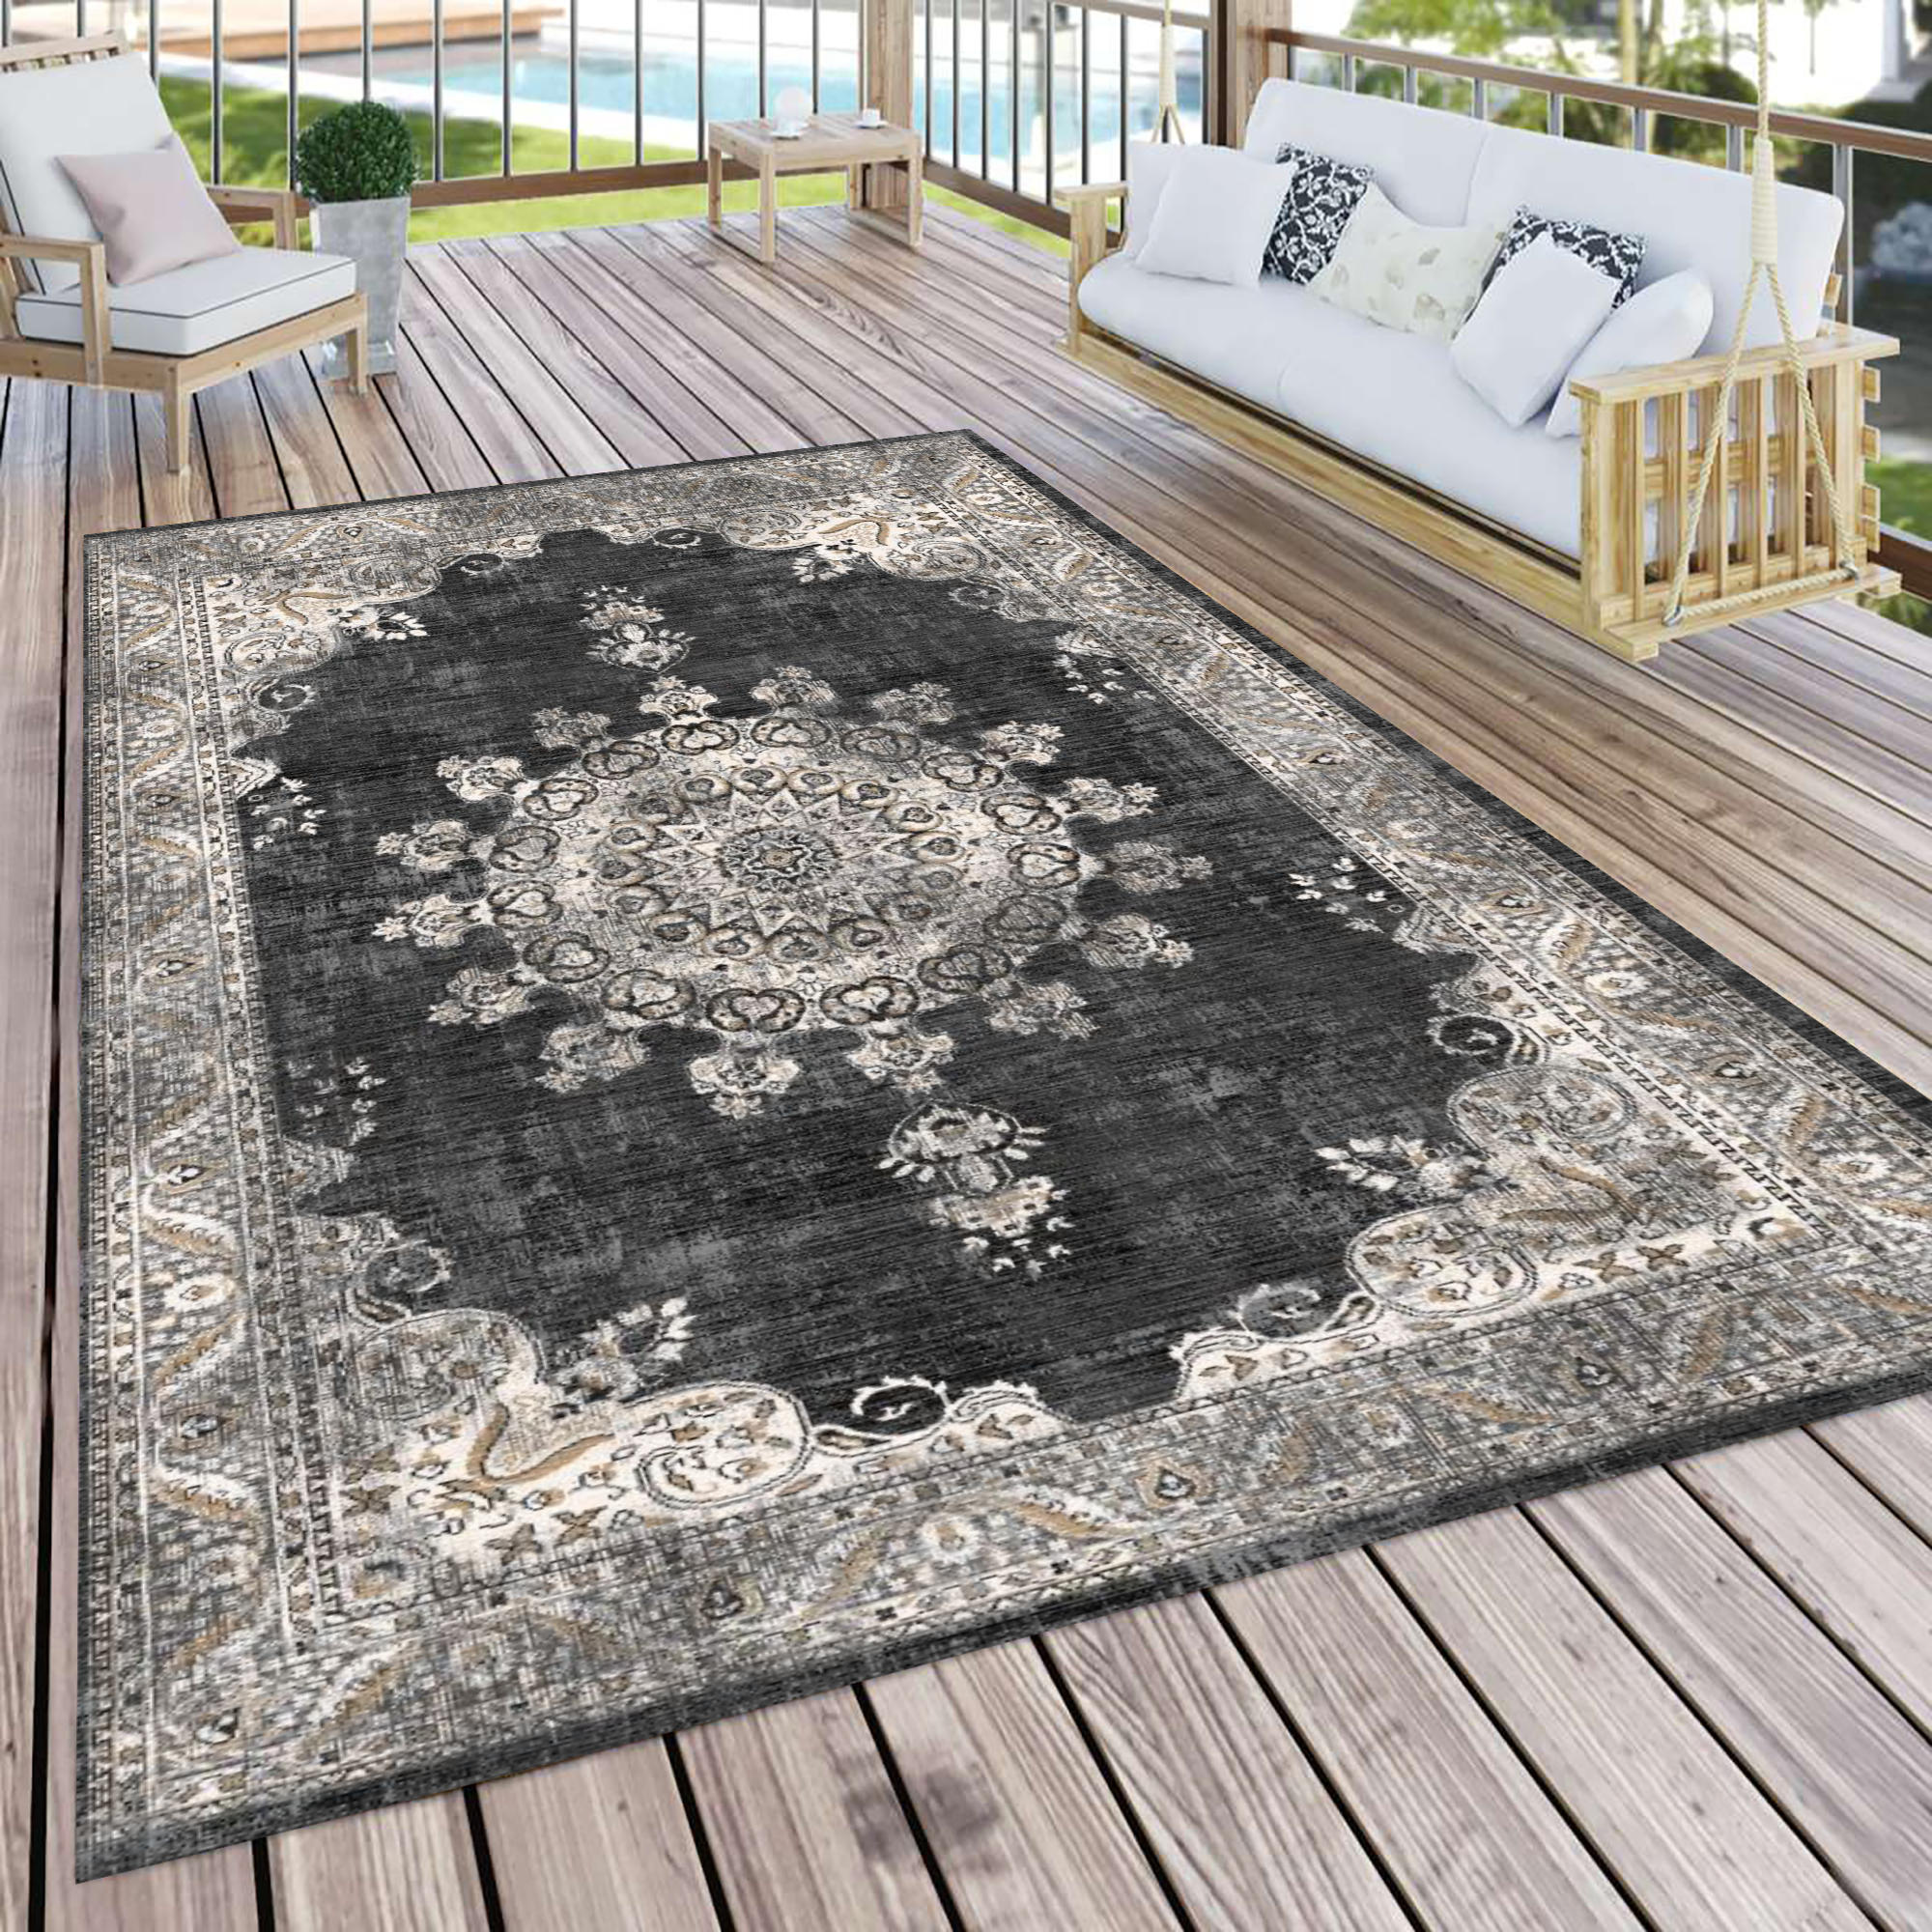 RAY SILVER Area Rug - Entryway Washable Rug Fits in Hallways, Bedrooms and Kitchen -Vintage Carpet - Stain and Water Resistant - Floor Mat Easy to wash - Non Slip (2'2'X7) Multi